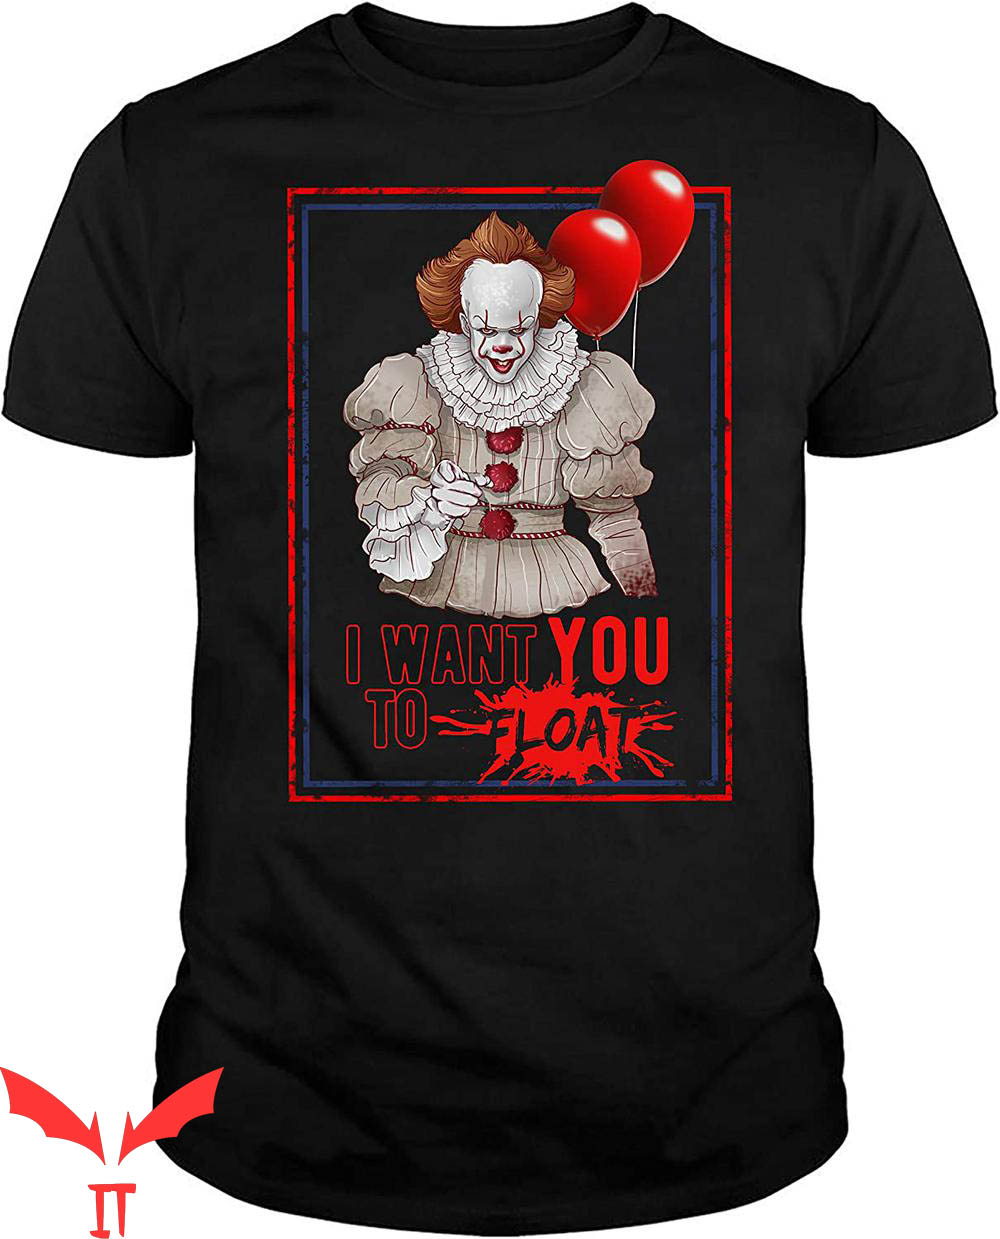 IT The Clown T-Shirt IT Want You to Float Clown Red Balloon